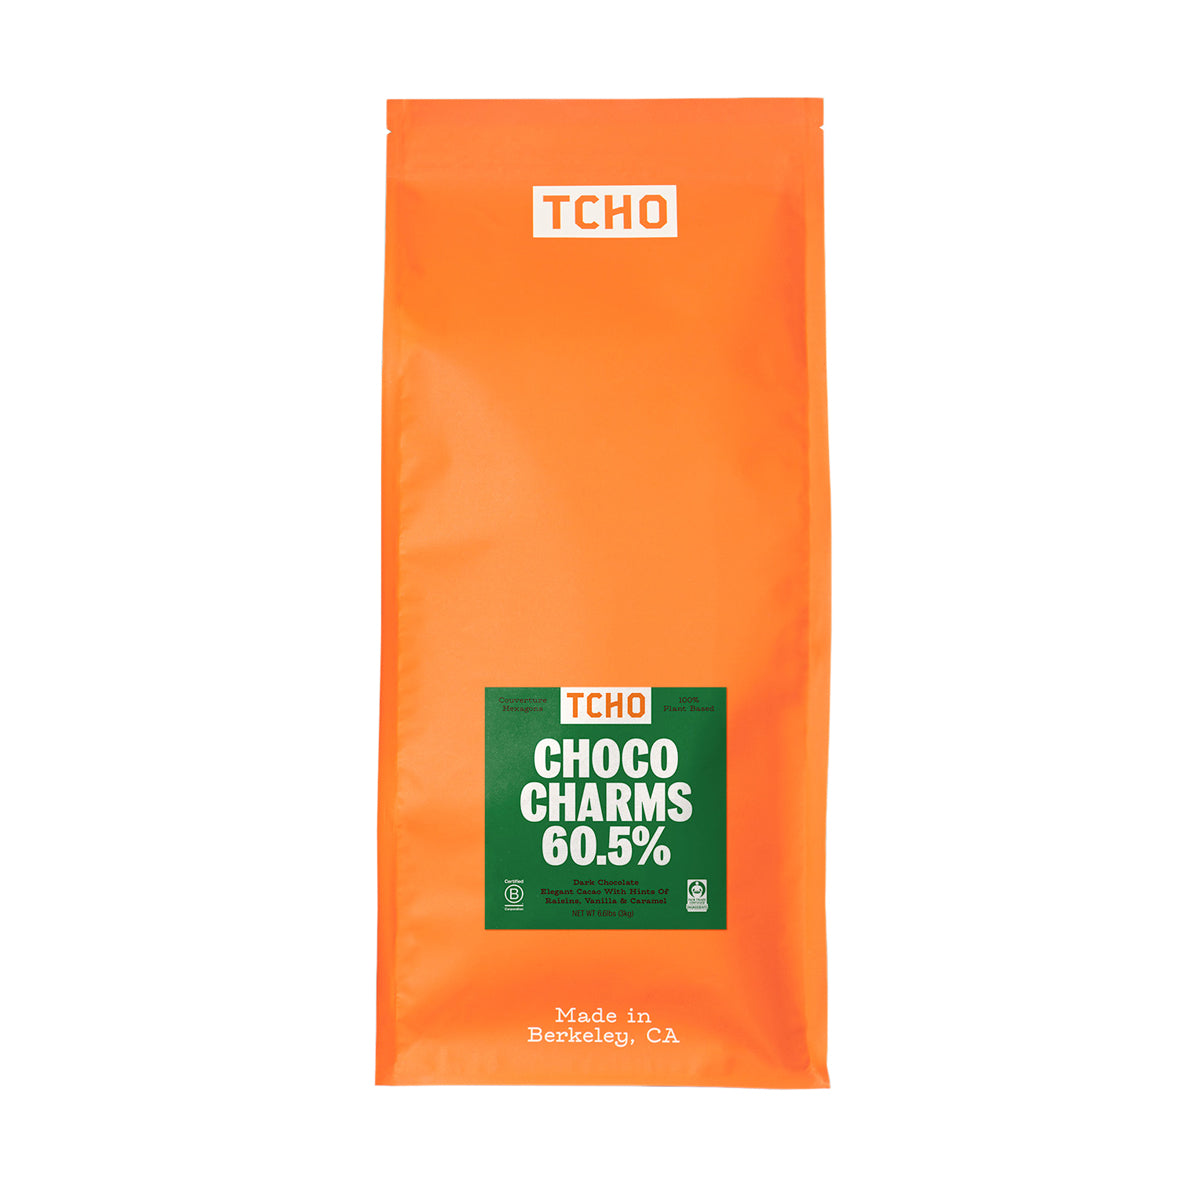 Tcho Chocolate 60.5% Semisweet Chocolate Couverture